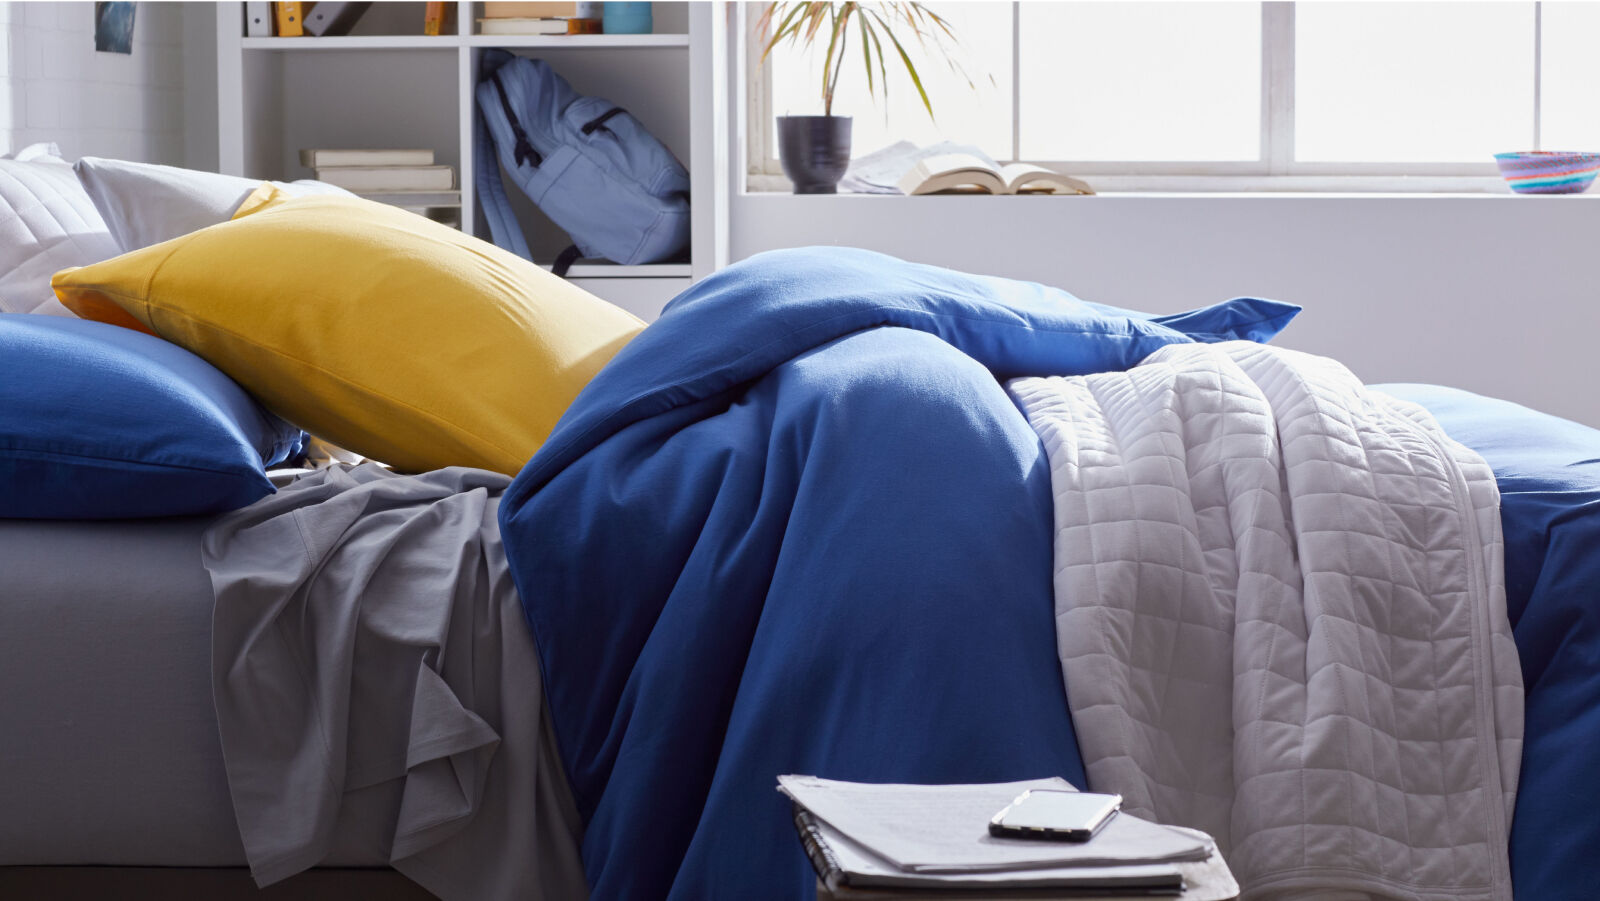 Jersey knit sheets and blue duvet cover